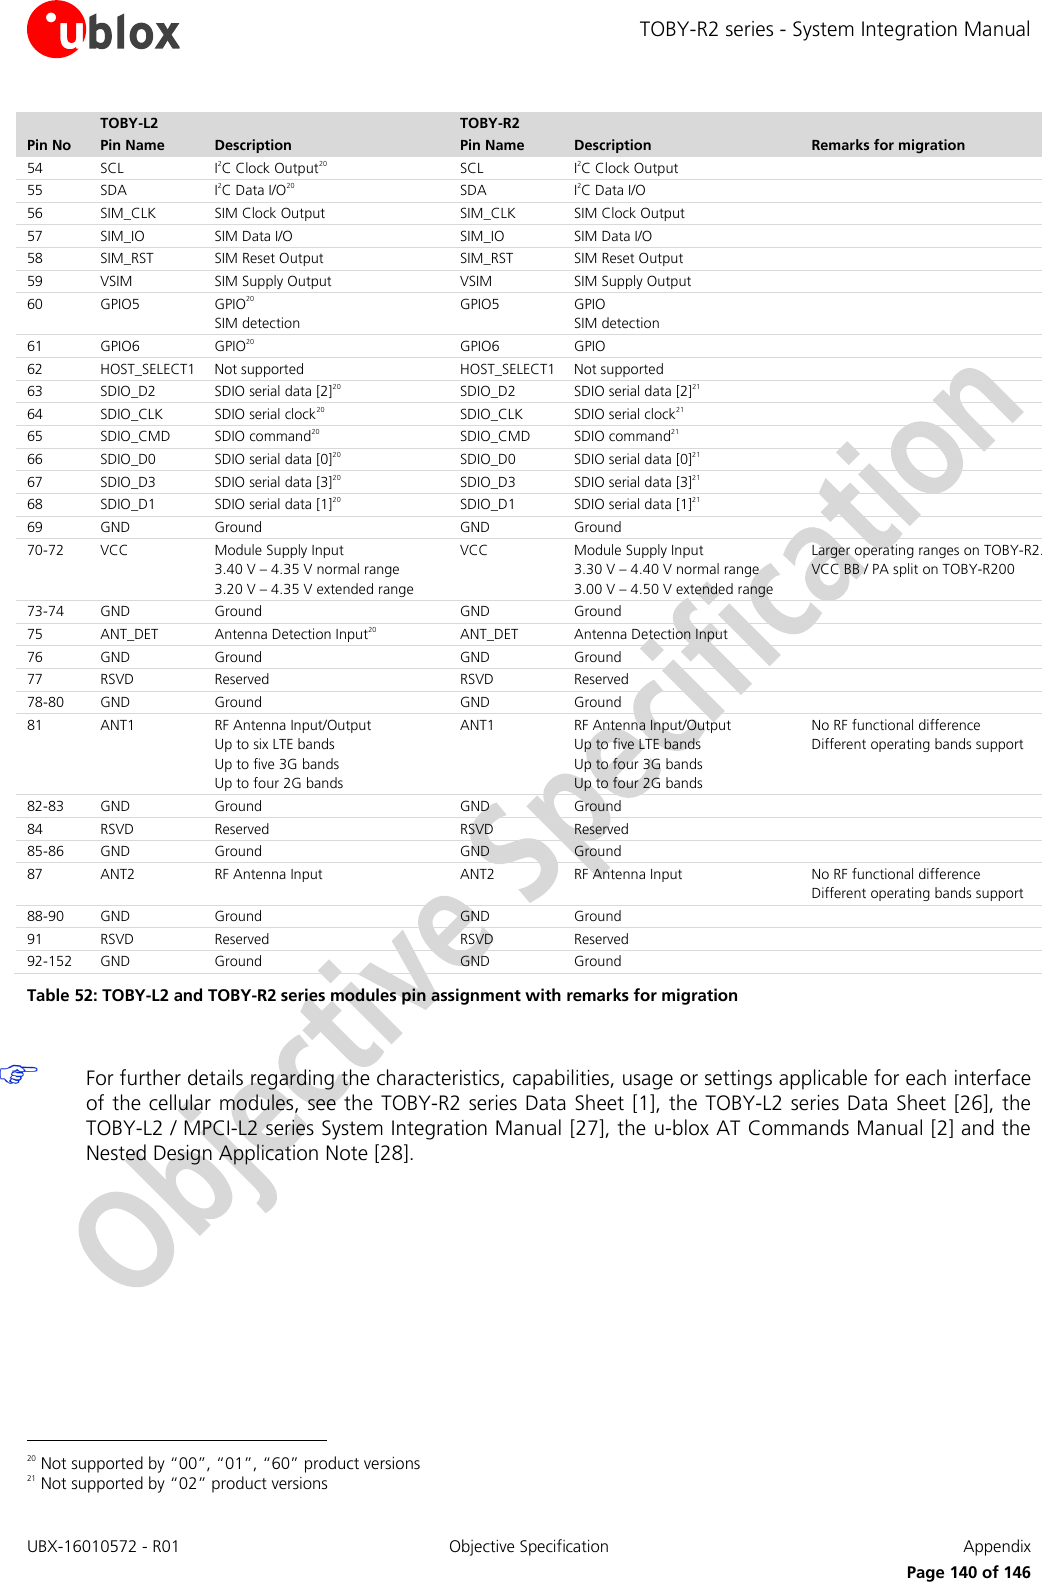 TOBY-R2 series - System Integration Manual UBX-16010572 - R01  Objective Specification  Appendix      Page 140 of 146  TOBY-L2  TOBY-R2   Pin No Pin Name Description Pin Name Description Remarks for migration 54 SCL I2C Clock Output20  SCL I2C Clock Output   55 SDA I2C Data I/O20 SDA I2C Data I/O  56 SIM_CLK SIM Clock Output SIM_CLK SIM Clock Output  57 SIM_IO SIM Data I/O SIM_IO SIM Data I/O  58 SIM_RST SIM Reset Output SIM_RST SIM Reset Output  59 VSIM SIM Supply Output VSIM SIM Supply Output  60 GPIO5 GPIO20 SIM detection GPIO5 GPIO SIM detection  61 GPIO6 GPIO20 GPIO6 GPIO  62 HOST_SELECT1 Not supported HOST_SELECT1 Not supported  63 SDIO_D2 SDIO serial data [2]20  SDIO_D2 SDIO serial data [2]21   64 SDIO_CLK SDIO serial clock20 SDIO_CLK SDIO serial clock21   65 SDIO_CMD SDIO command20 SDIO_CMD SDIO command21  66 SDIO_D0 SDIO serial data [0]20 SDIO_D0 SDIO serial data [0]21   67 SDIO_D3 SDIO serial data [3]20  SDIO_D3 SDIO serial data [3]21  68 SDIO_D1 SDIO serial data [1]20  SDIO_D1 SDIO serial data [1]21  69 GND Ground GND Ground  70-72 VCC Module Supply Input 3.40 V – 4.35 V normal range 3.20 V – 4.35 V extended range VCC Module Supply Input 3.30 V – 4.40 V normal range 3.00 V – 4.50 V extended range Larger operating ranges on TOBY-R2. VCC BB / PA split on TOBY-R200 73-74 GND Ground GND Ground  75 ANT_DET Antenna Detection Input20 ANT_DET Antenna Detection Input  76 GND Ground GND Ground  77 RSVD Reserved RSVD Reserved  78-80 GND Ground GND Ground  81 ANT1 RF Antenna Input/Output Up to six LTE bands Up to five 3G bands Up to four 2G bands ANT1 RF Antenna Input/Output Up to five LTE bands Up to four 3G bands Up to four 2G bands No RF functional difference Different operating bands support 82-83 GND Ground GND Ground  84 RSVD Reserved RSVD Reserved  85-86 GND Ground GND Ground  87 ANT2 RF Antenna Input  ANT2 RF Antenna Input  No RF functional difference  Different operating bands support 88-90 GND Ground GND Ground  91 RSVD Reserved RSVD Reserved  92-152 GND Ground GND Ground  Table 52: TOBY-L2 and TOBY-R2 series modules pin assignment with remarks for migration   For further details regarding the characteristics, capabilities, usage or settings applicable for each interface of the cellular modules, see the TOBY-R2 series Data Sheet  [1], the TOBY-L2 series Data Sheet [26], the TOBY-L2 / MPCI-L2 series System Integration Manual [27], the u-blox AT Commands Manual [2] and the Nested Design Application Note [28].                                                        20 Not supported by “00”, “01”, “60” product versions 21 Not supported by “02” product versions 